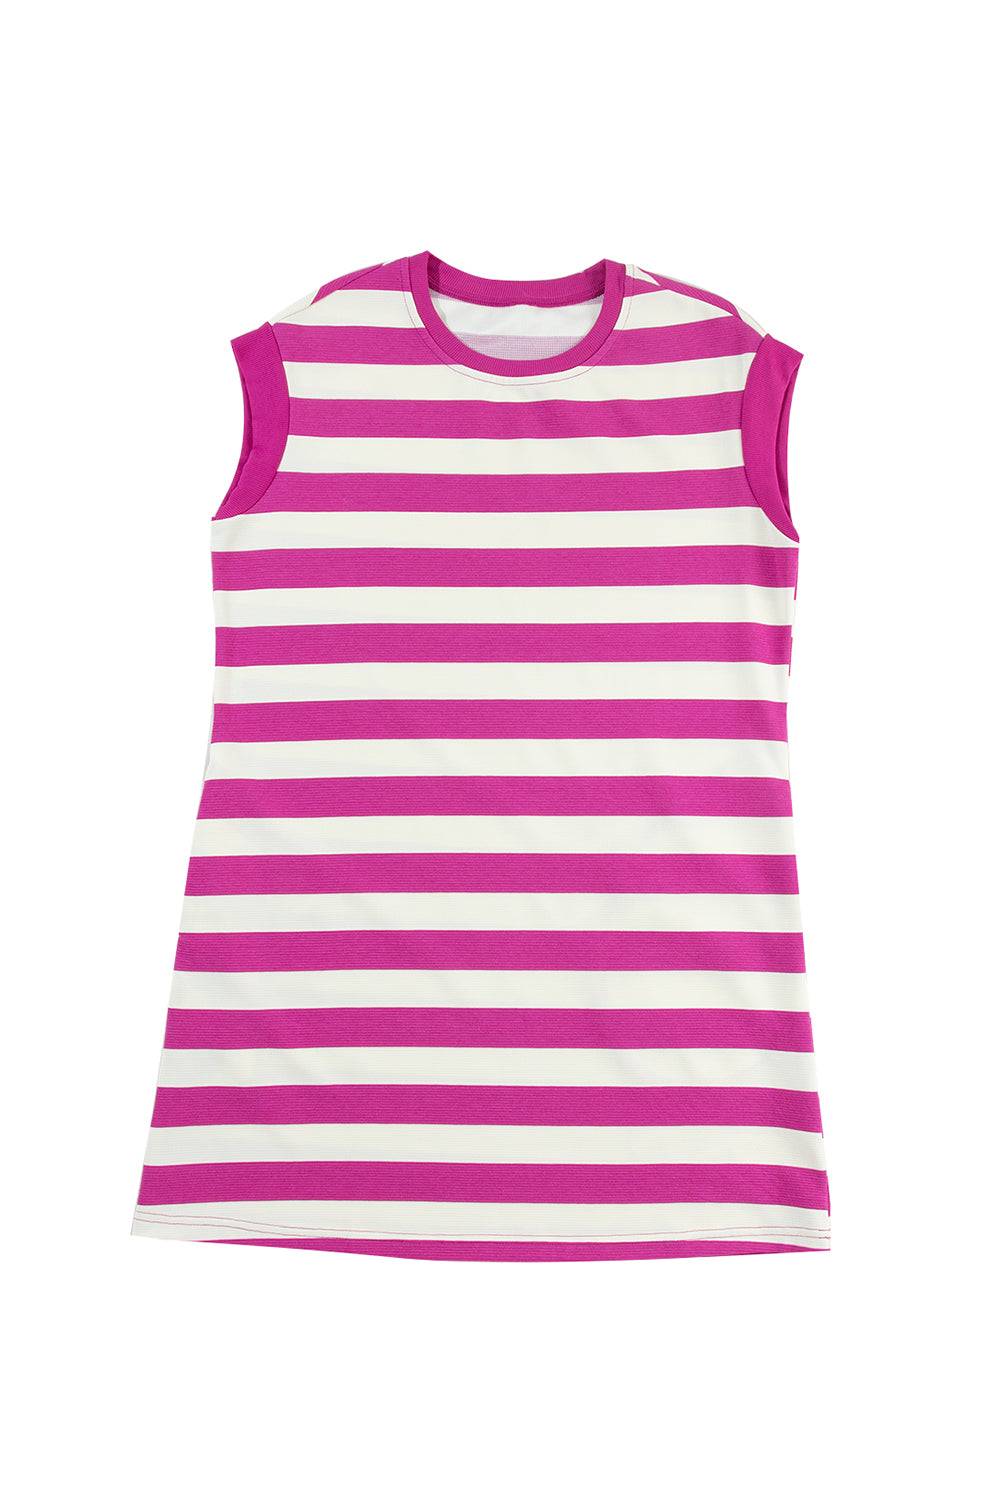 a pink and white striped top on a white background